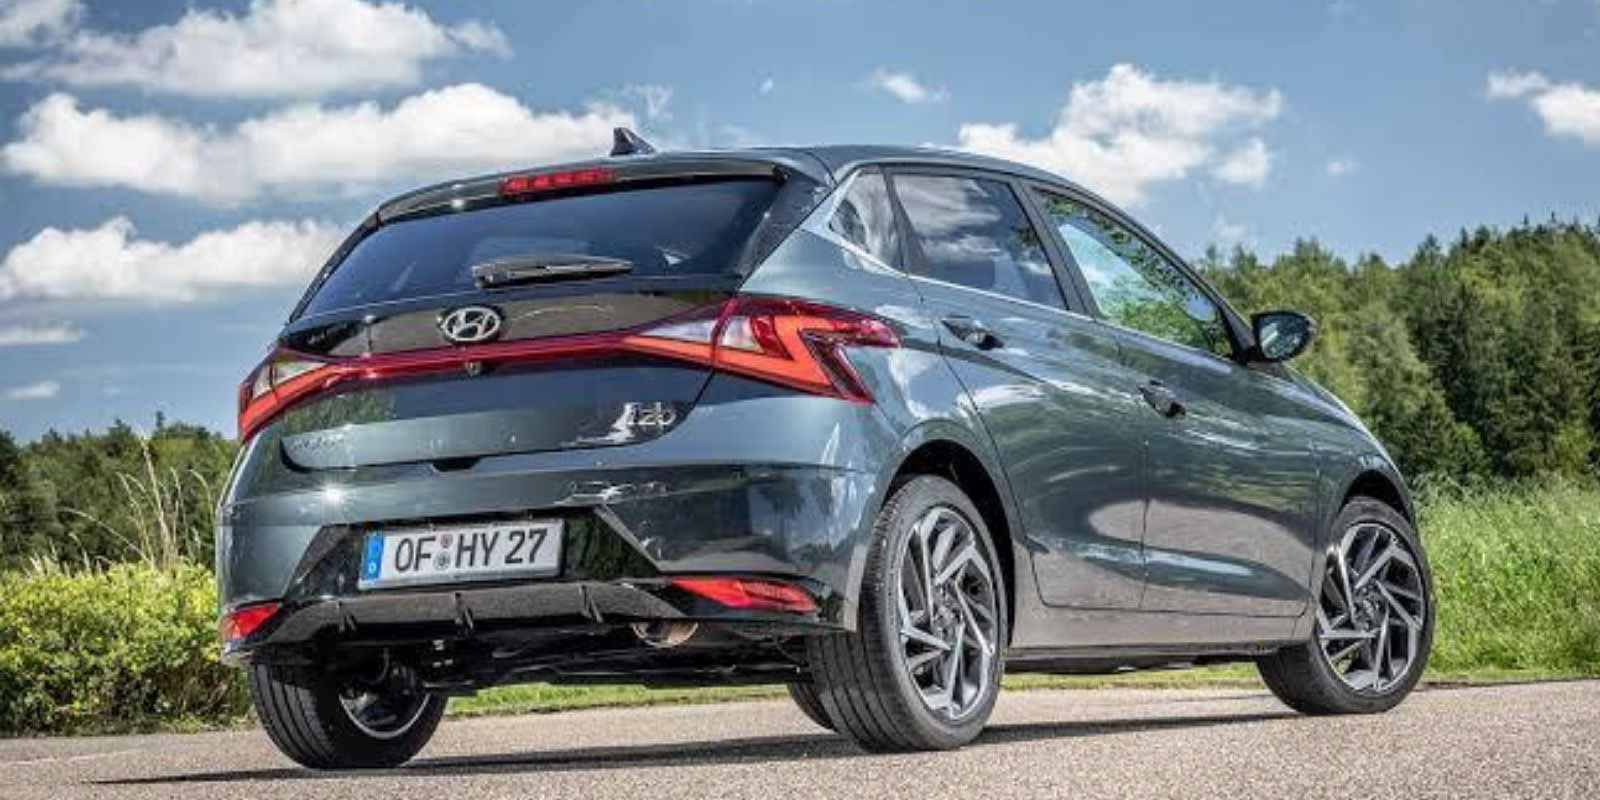 New-Gen Hyundai Elite i20 Nearing Its Launch; To Share Engines With Venue